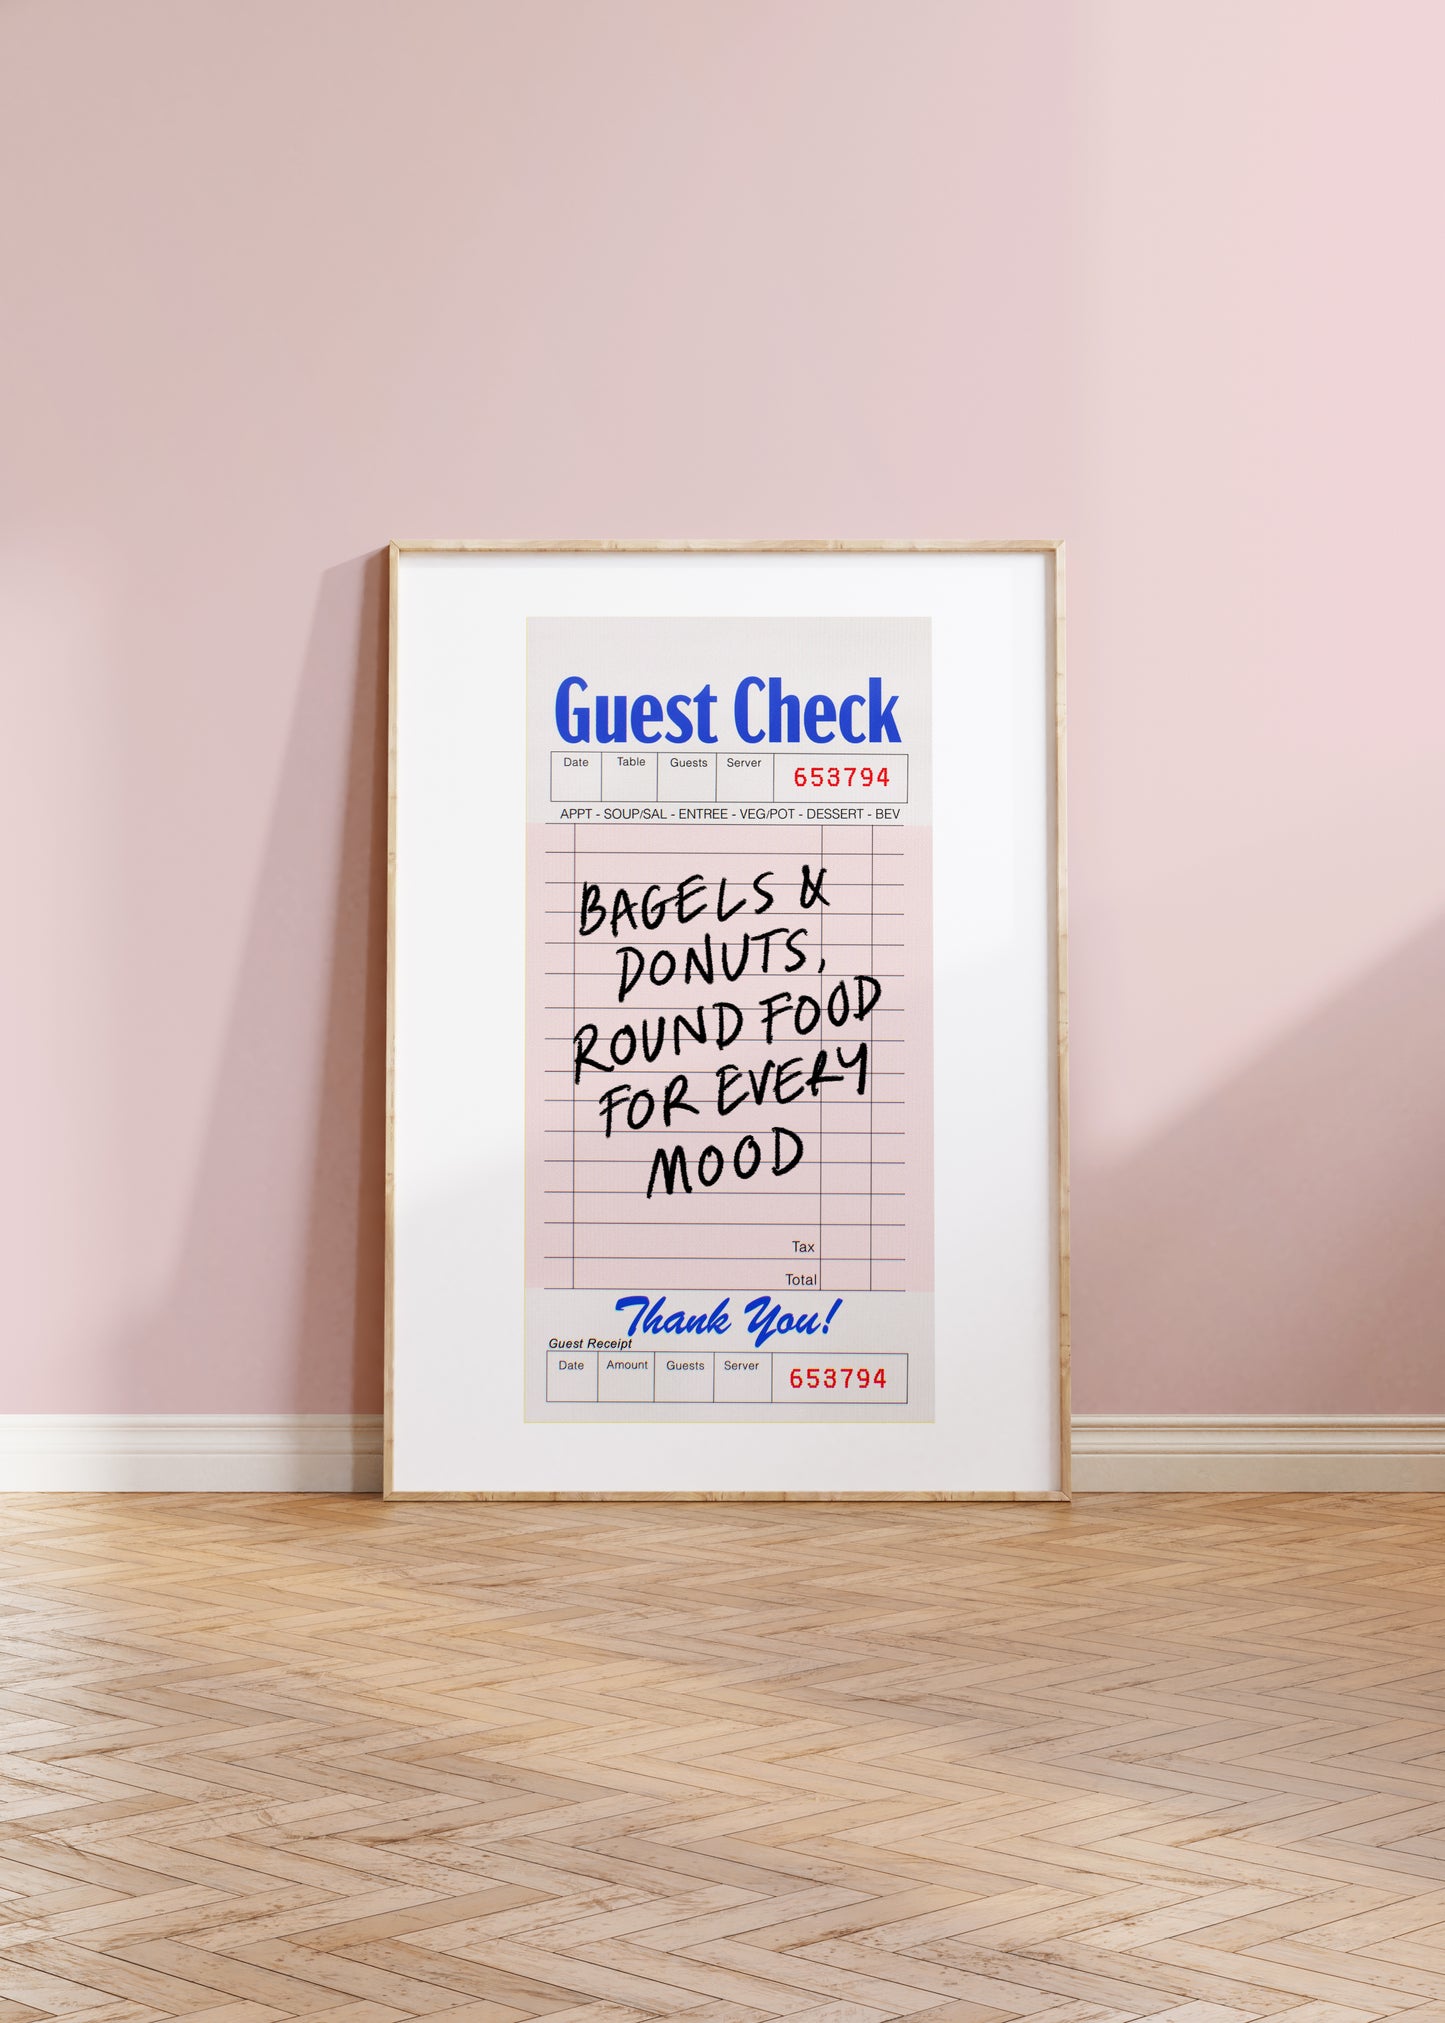 Bagels & Donuts, Round Food For Every Mood Guest Check Print